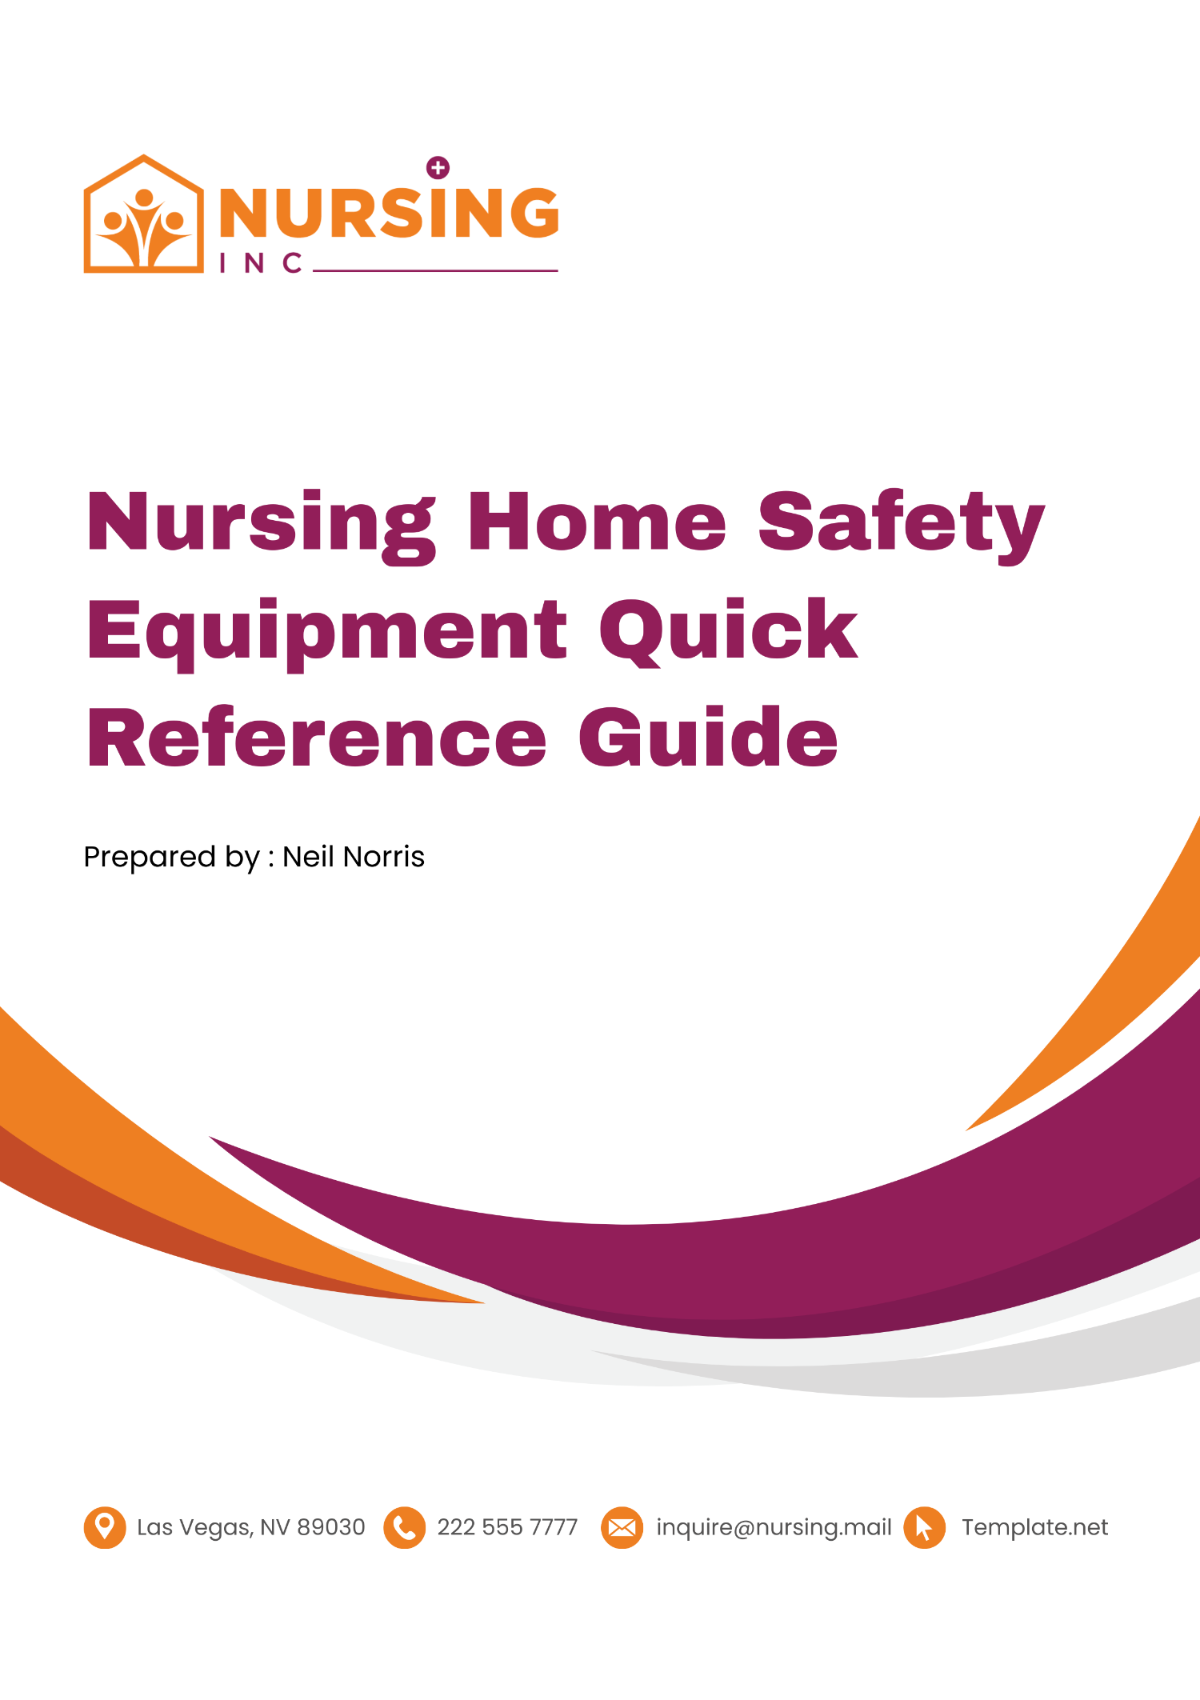 Nursing Home Safety Equipment Quick Reference Guide Template